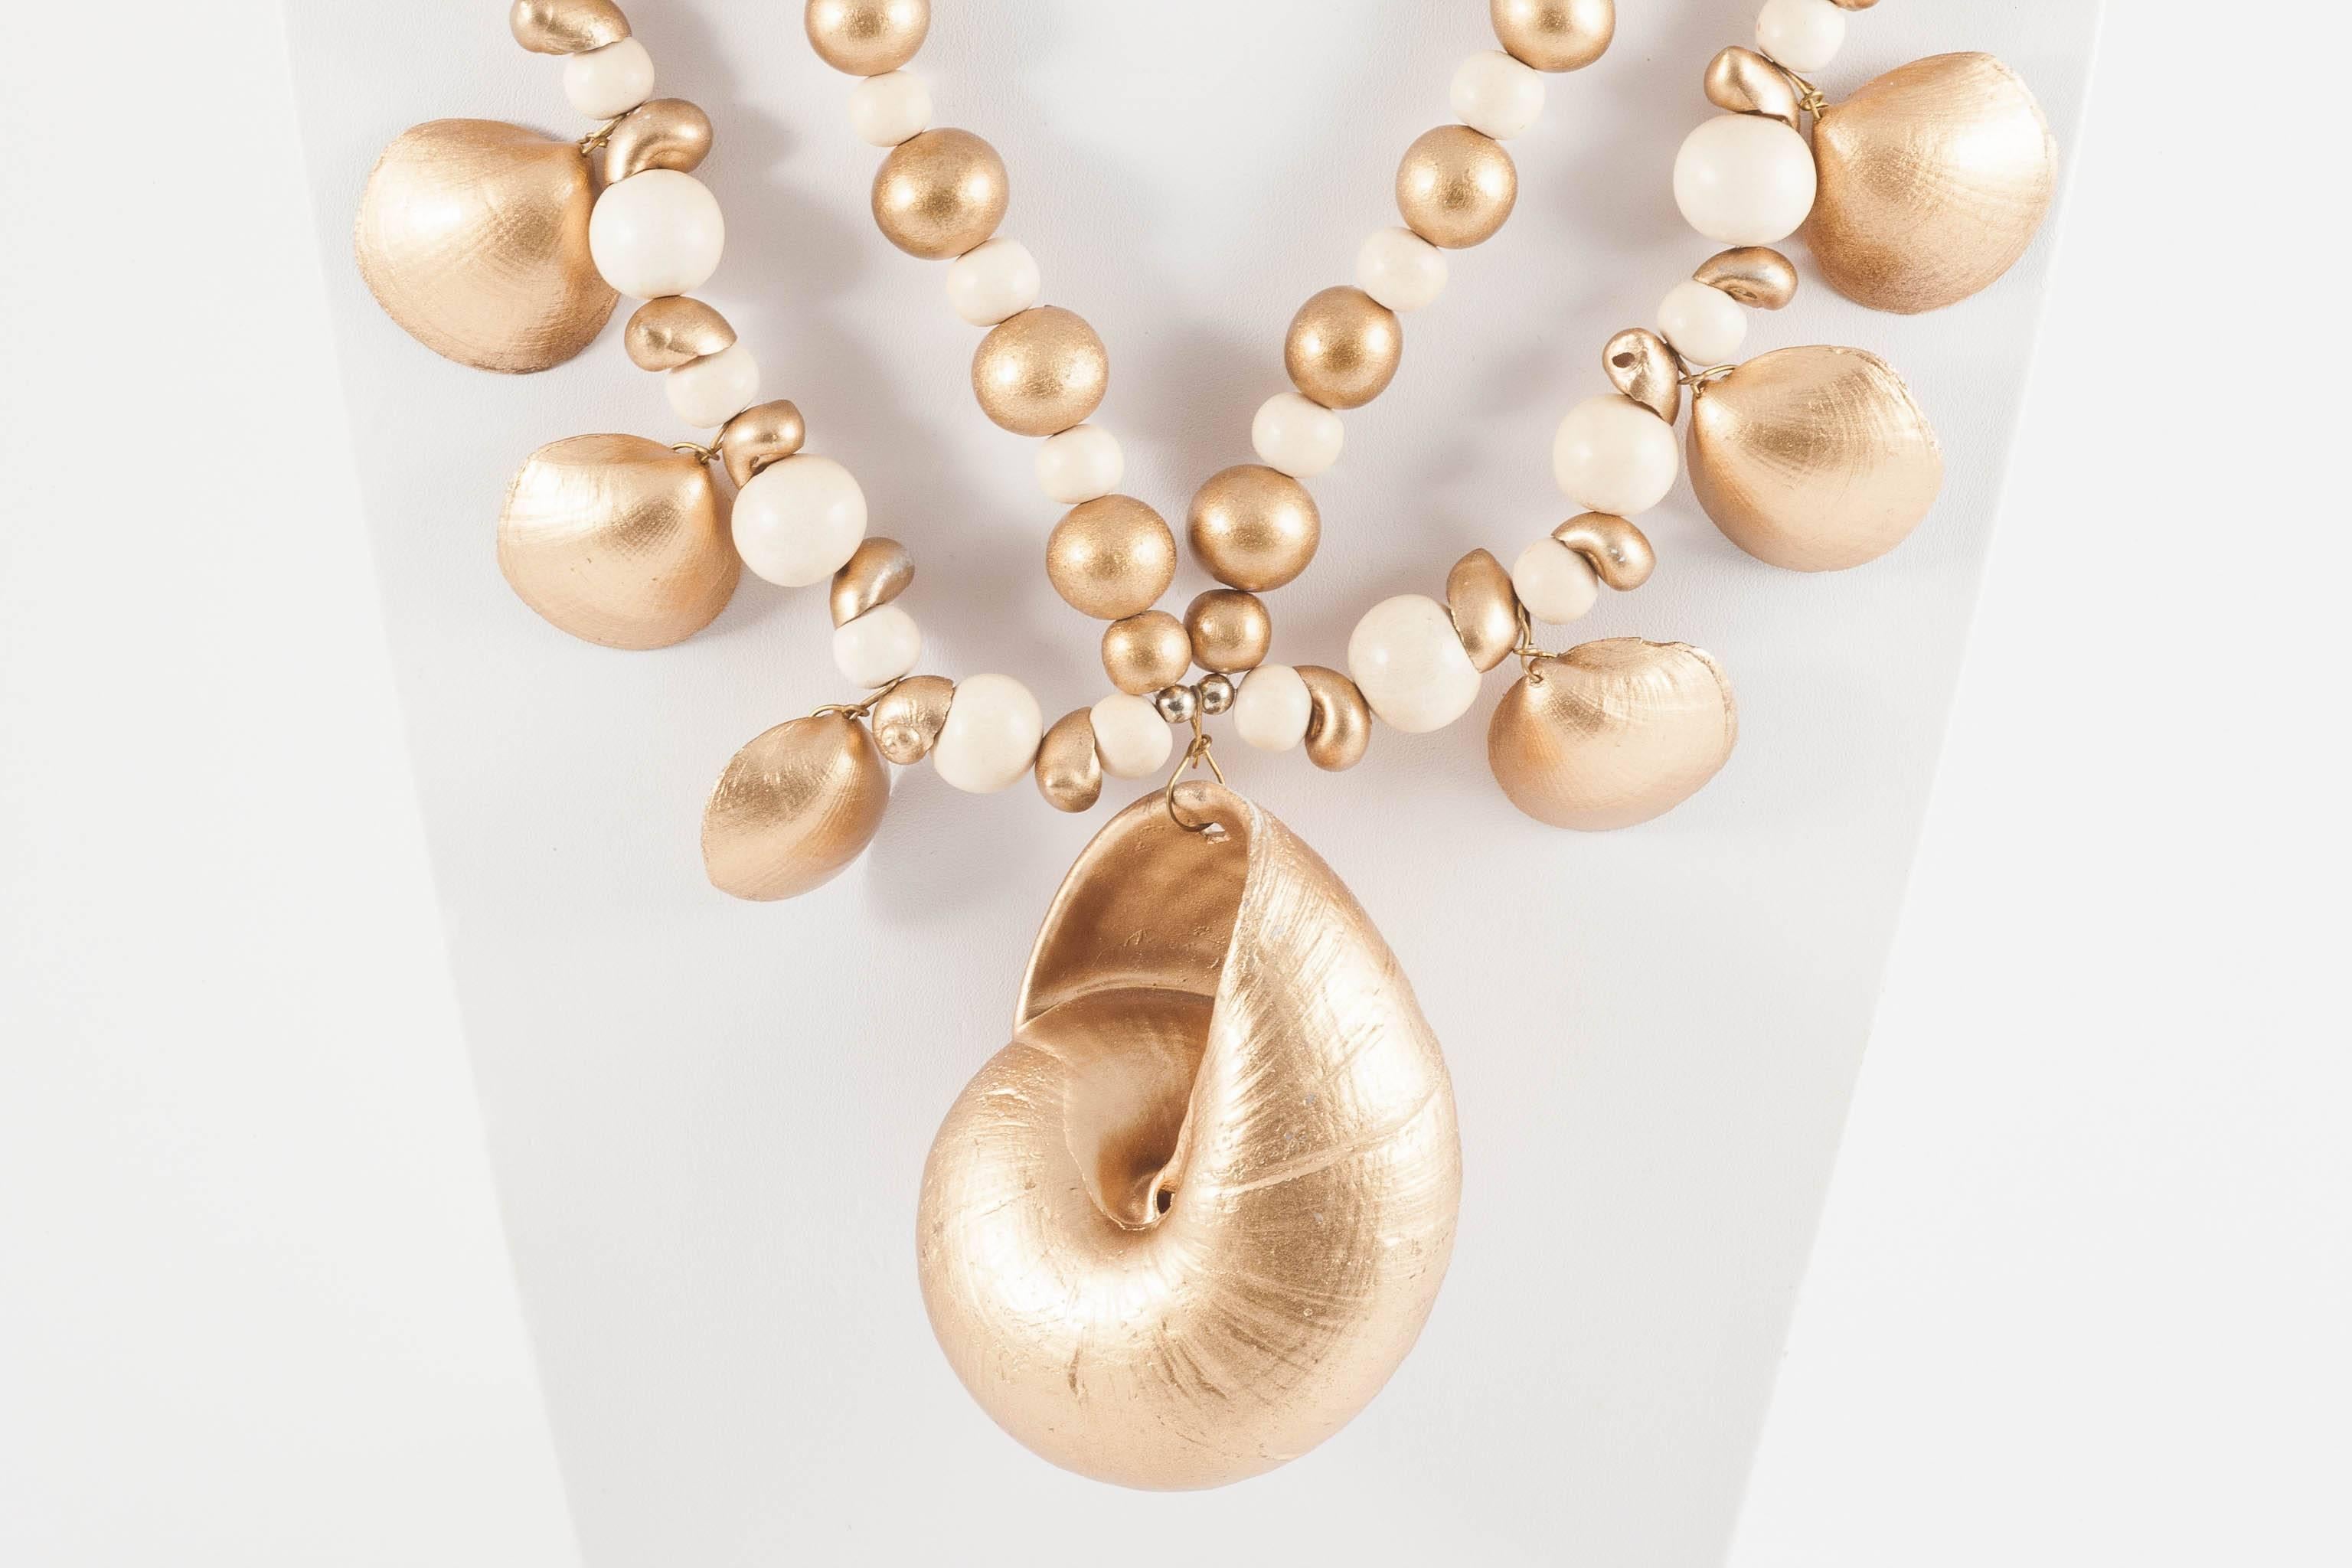 This very large, highly flamboyant and decorative necklace, with large central gilded shell pendant, made from cream and gilded wooden round beads, and gilded shells of assorted shapes and sizes, is fun, dynamic and exotic and  would be sensational